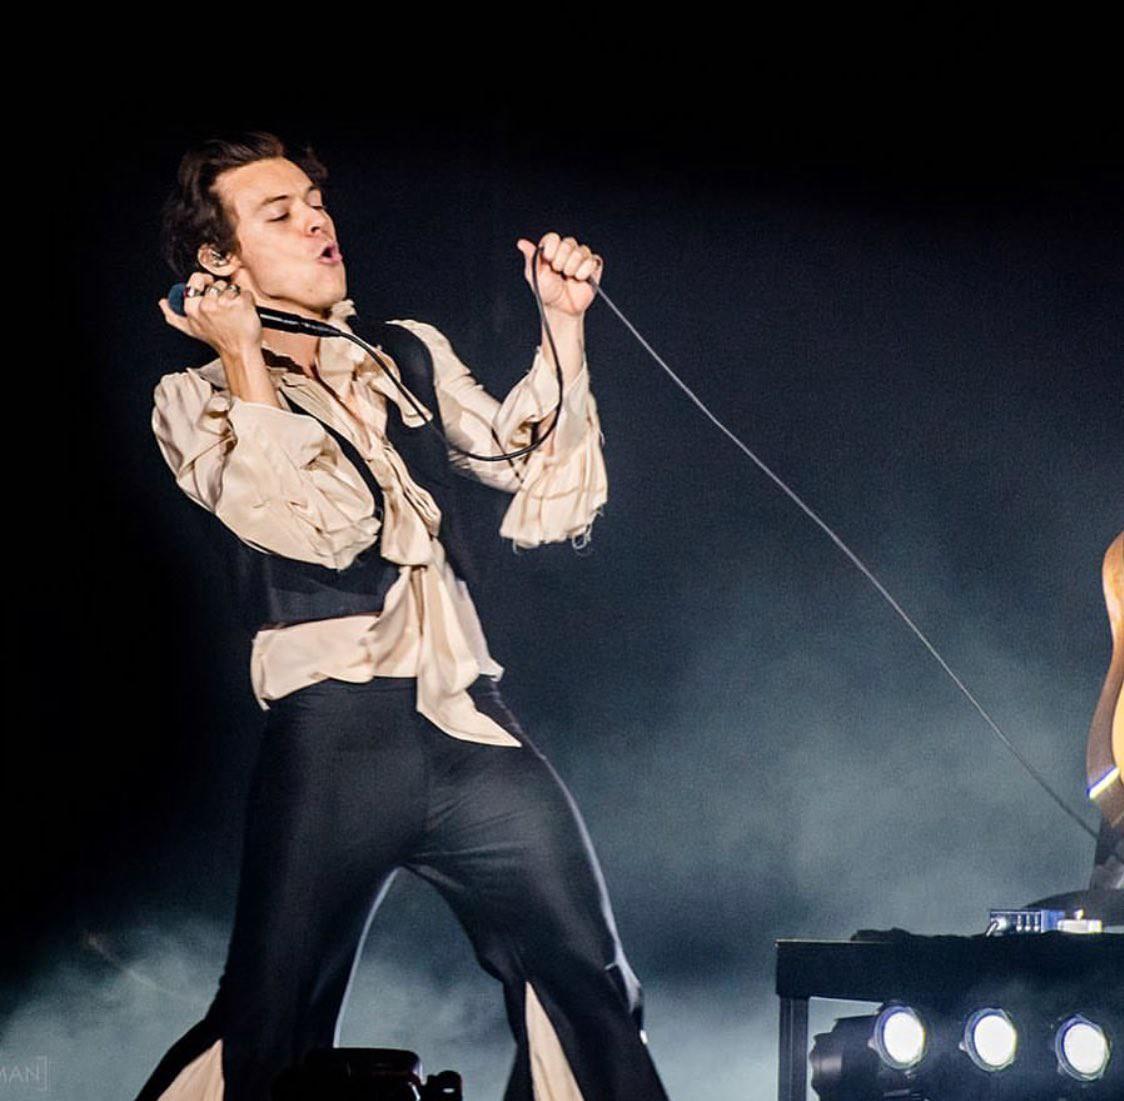 My Definitive Ranking of Harry Styles' 2018 Tour Outfits